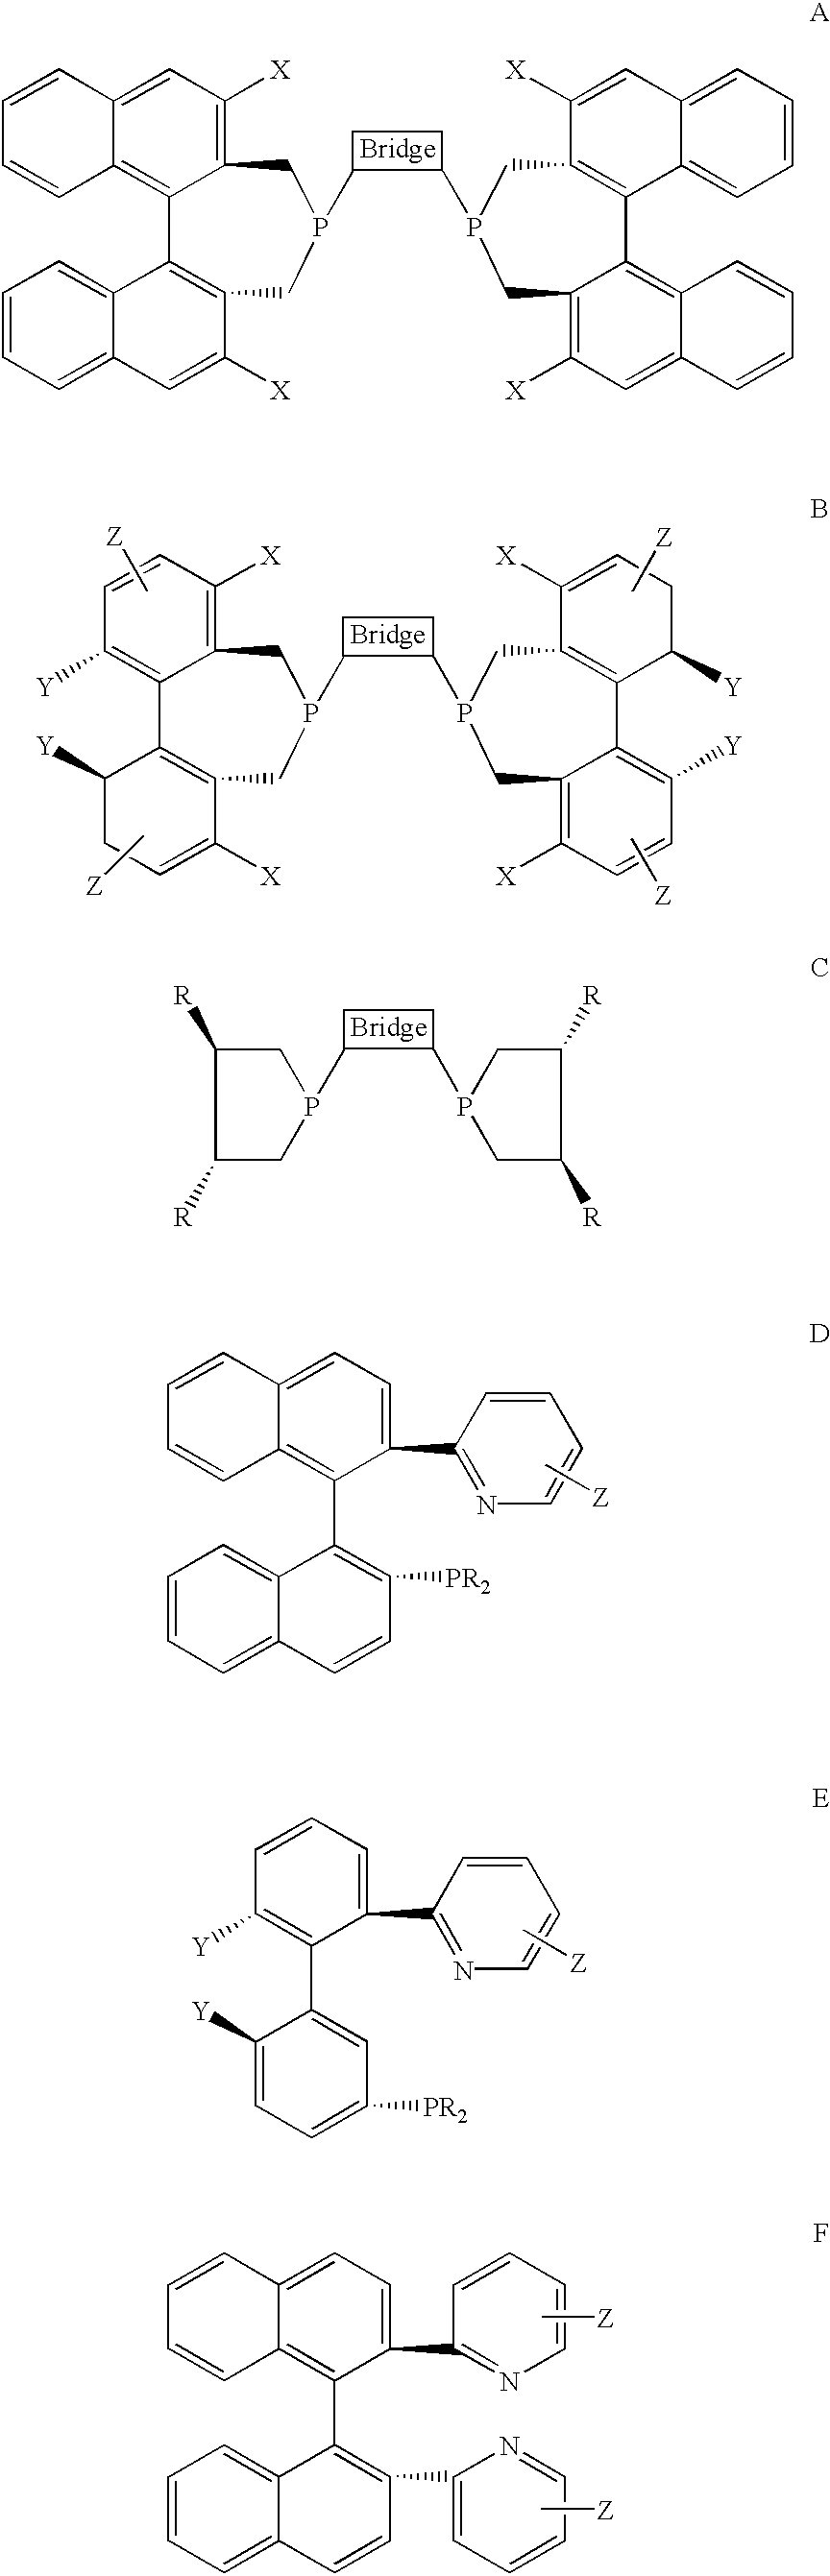 Chiral ligands, transition-metal complexes thereof and uses thereof in asymmetric reactions